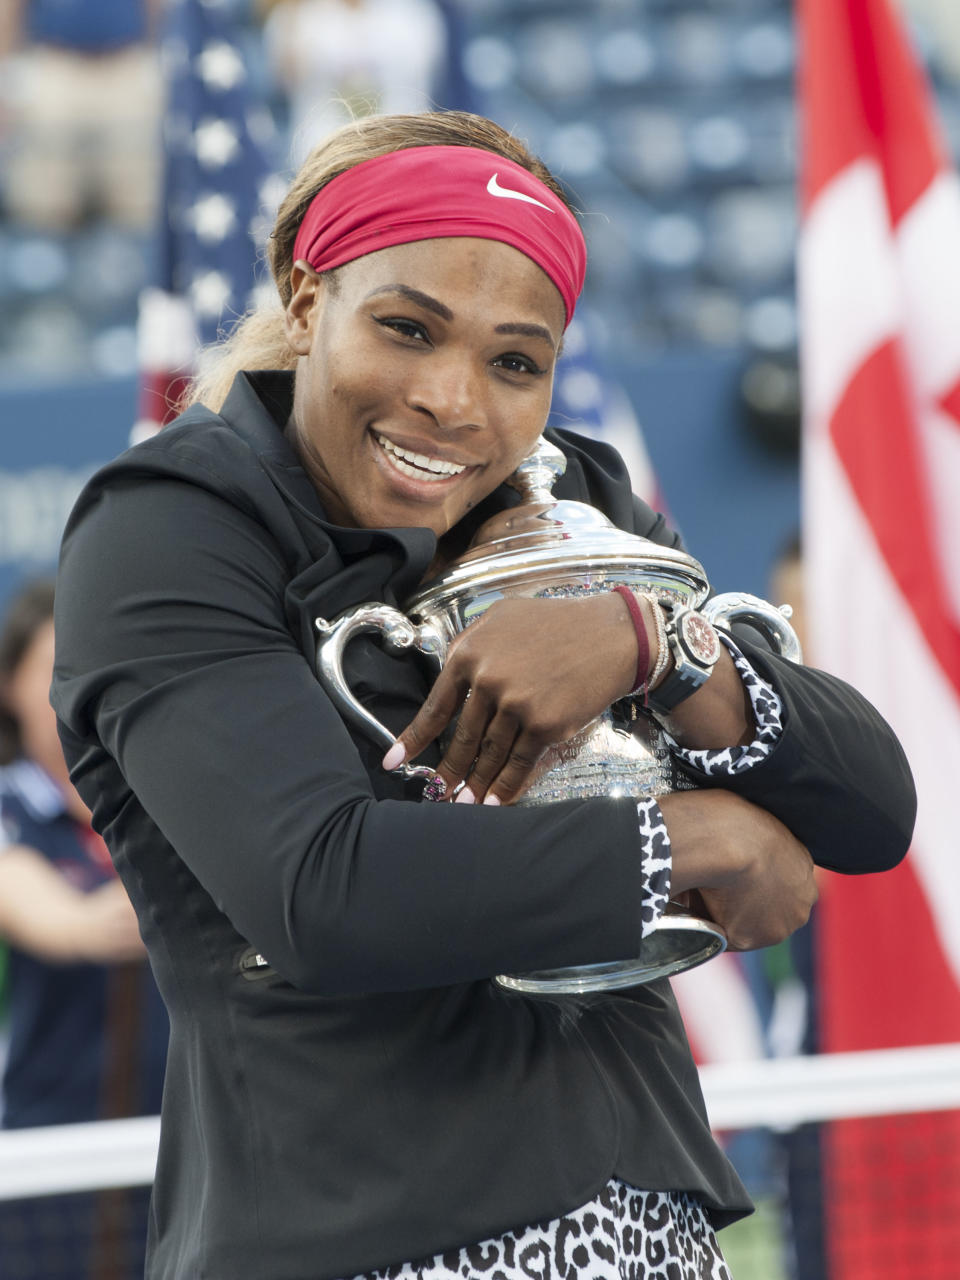 Serena Williams posing with the trophy after defeating Caroline Wozniacki of Denmark in the women's singles final at the US Open, Billie Jean King National Tennis Center, Flushing Meadow, NY. (Photo by Cynthia Lum/Icon Sportswire/Corbis via Getty Images)